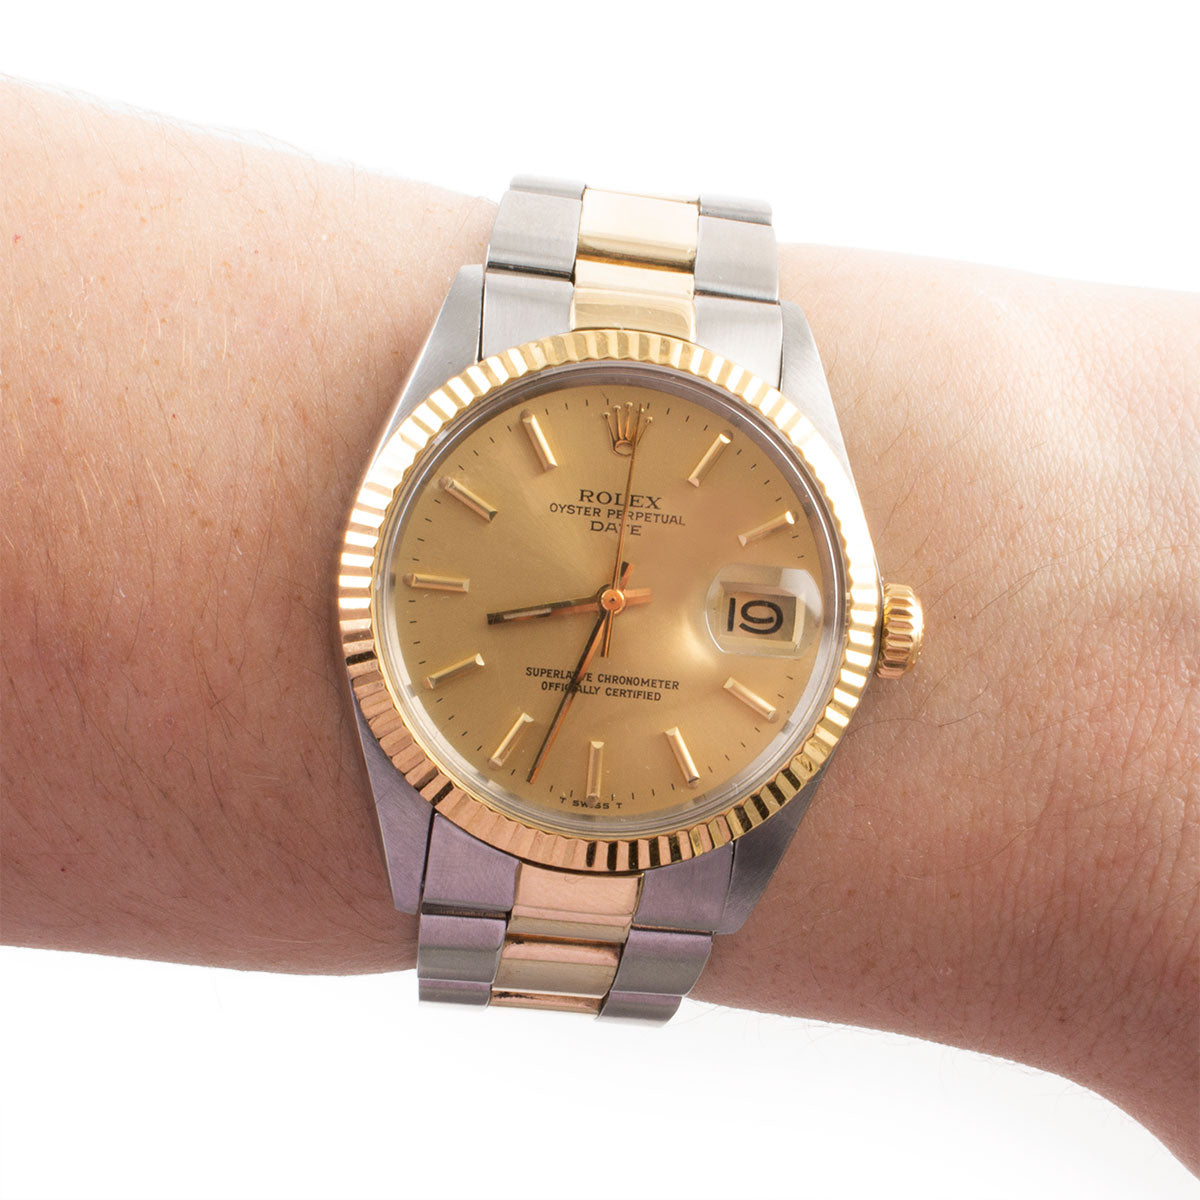 Second-hand watch - Rolex - Oyster Perpetual - 5650€